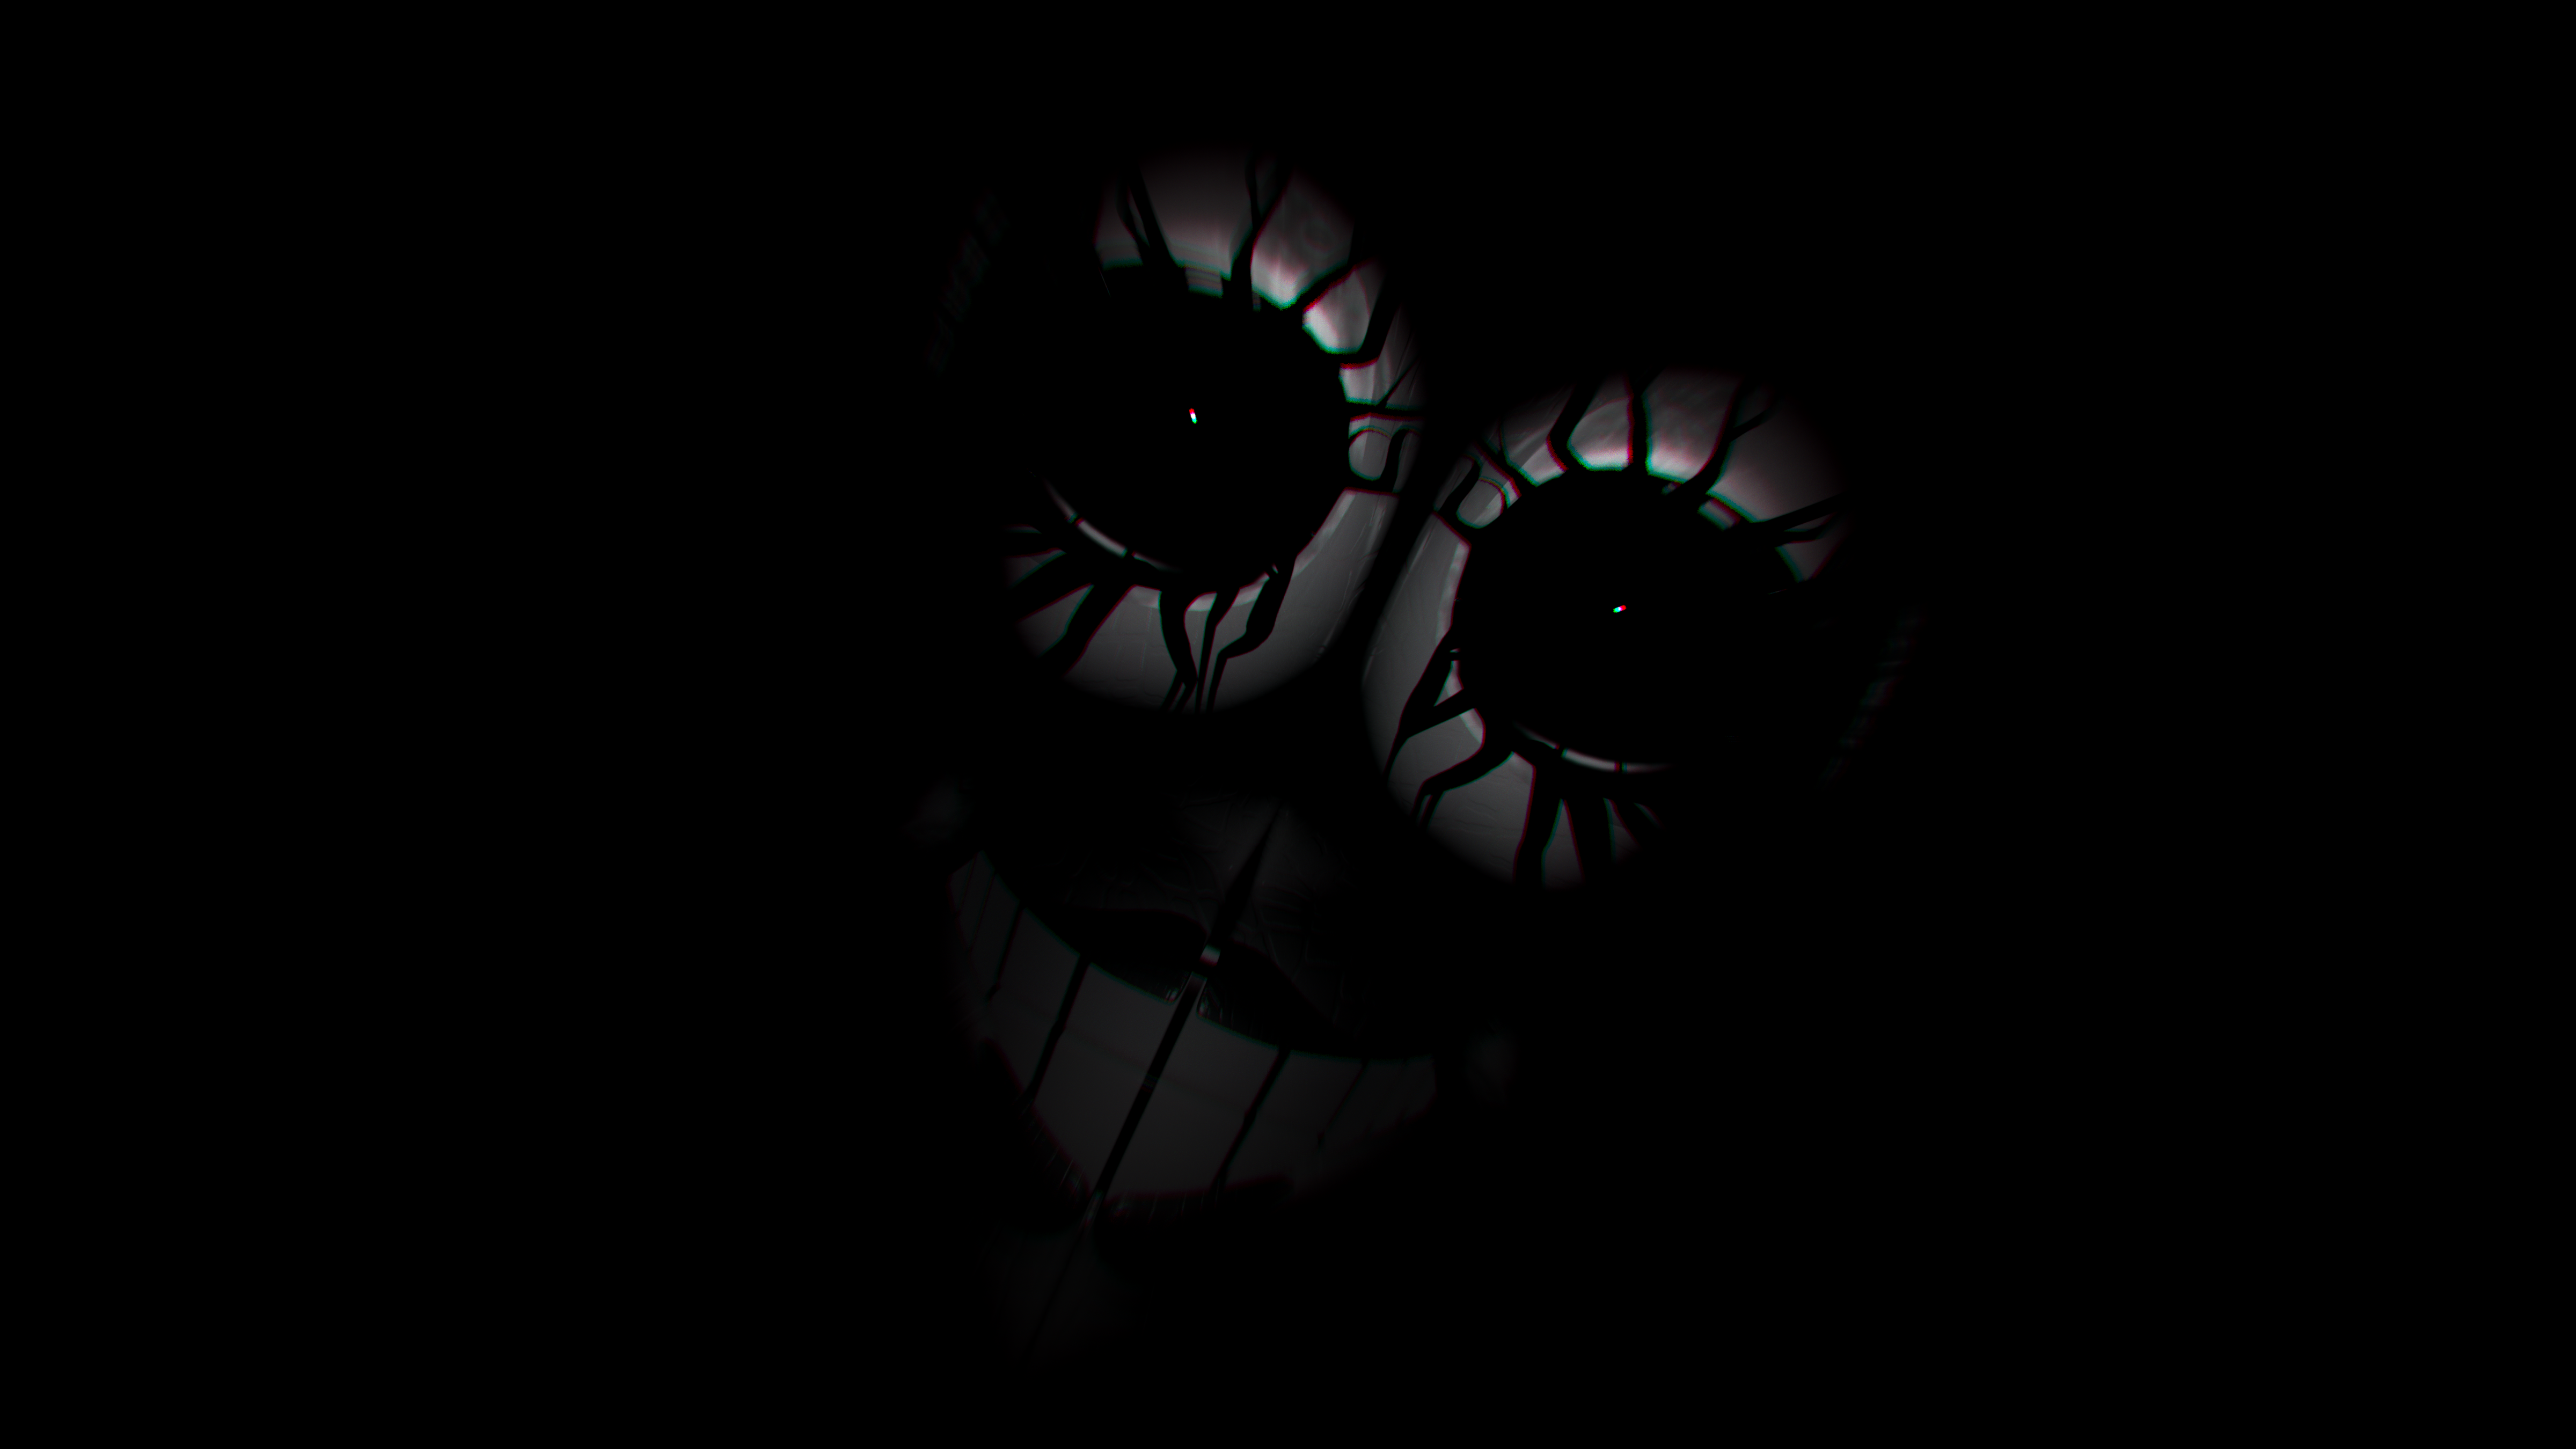 Stare into the darkness for long enough by EndyArts on DeviantArt